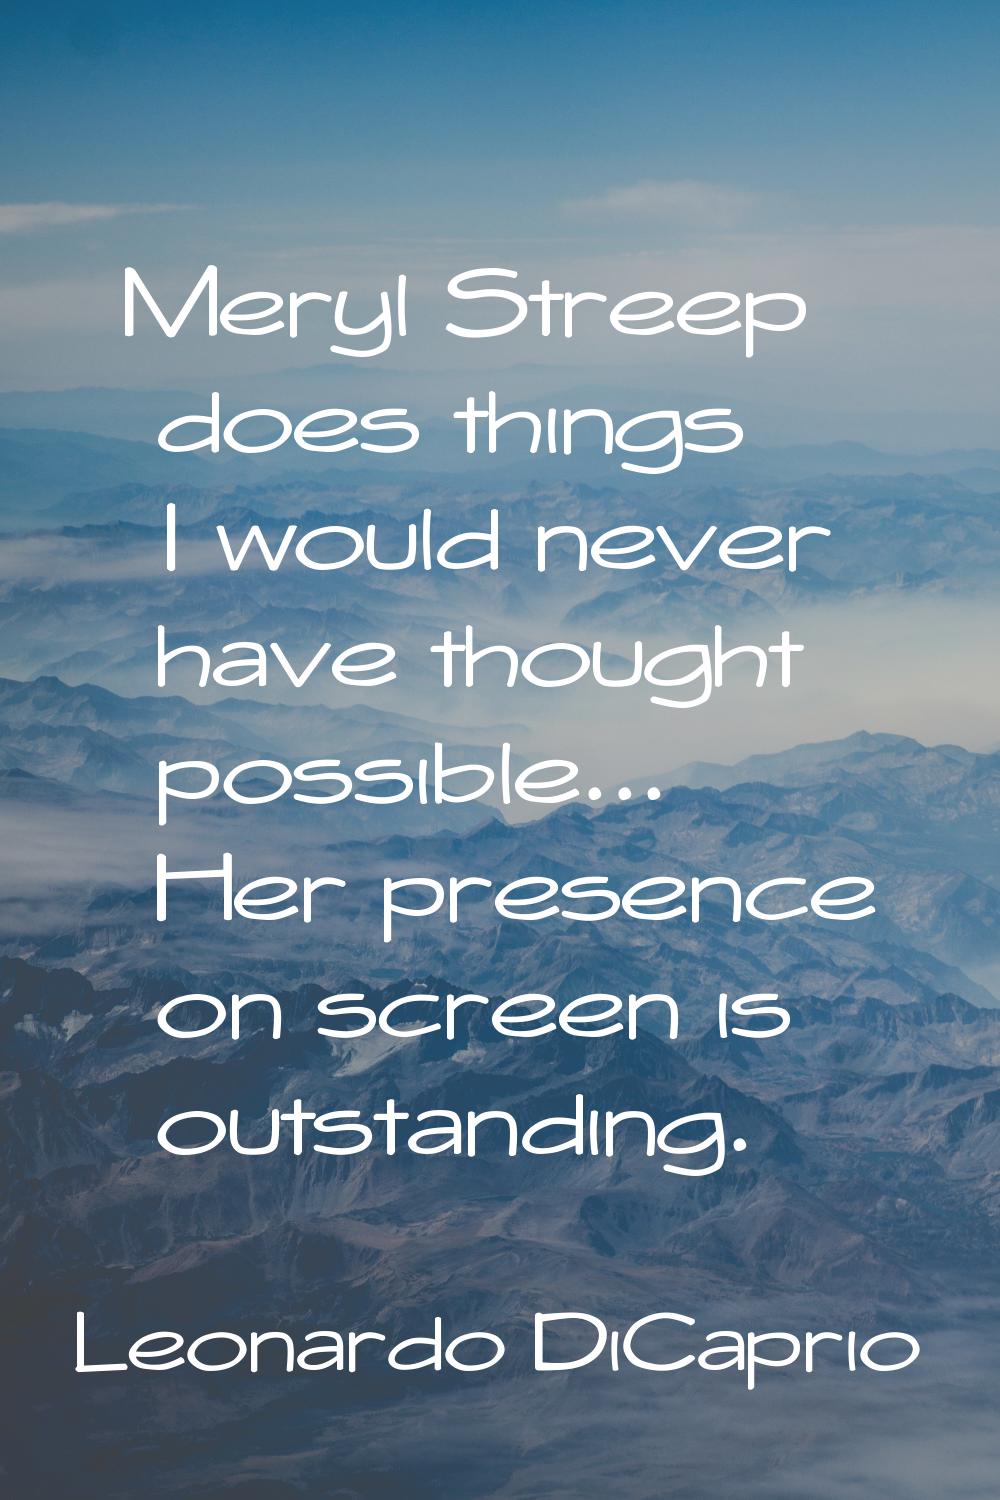 Meryl Streep does things I would never have thought possible... Her presence on screen is outstandi